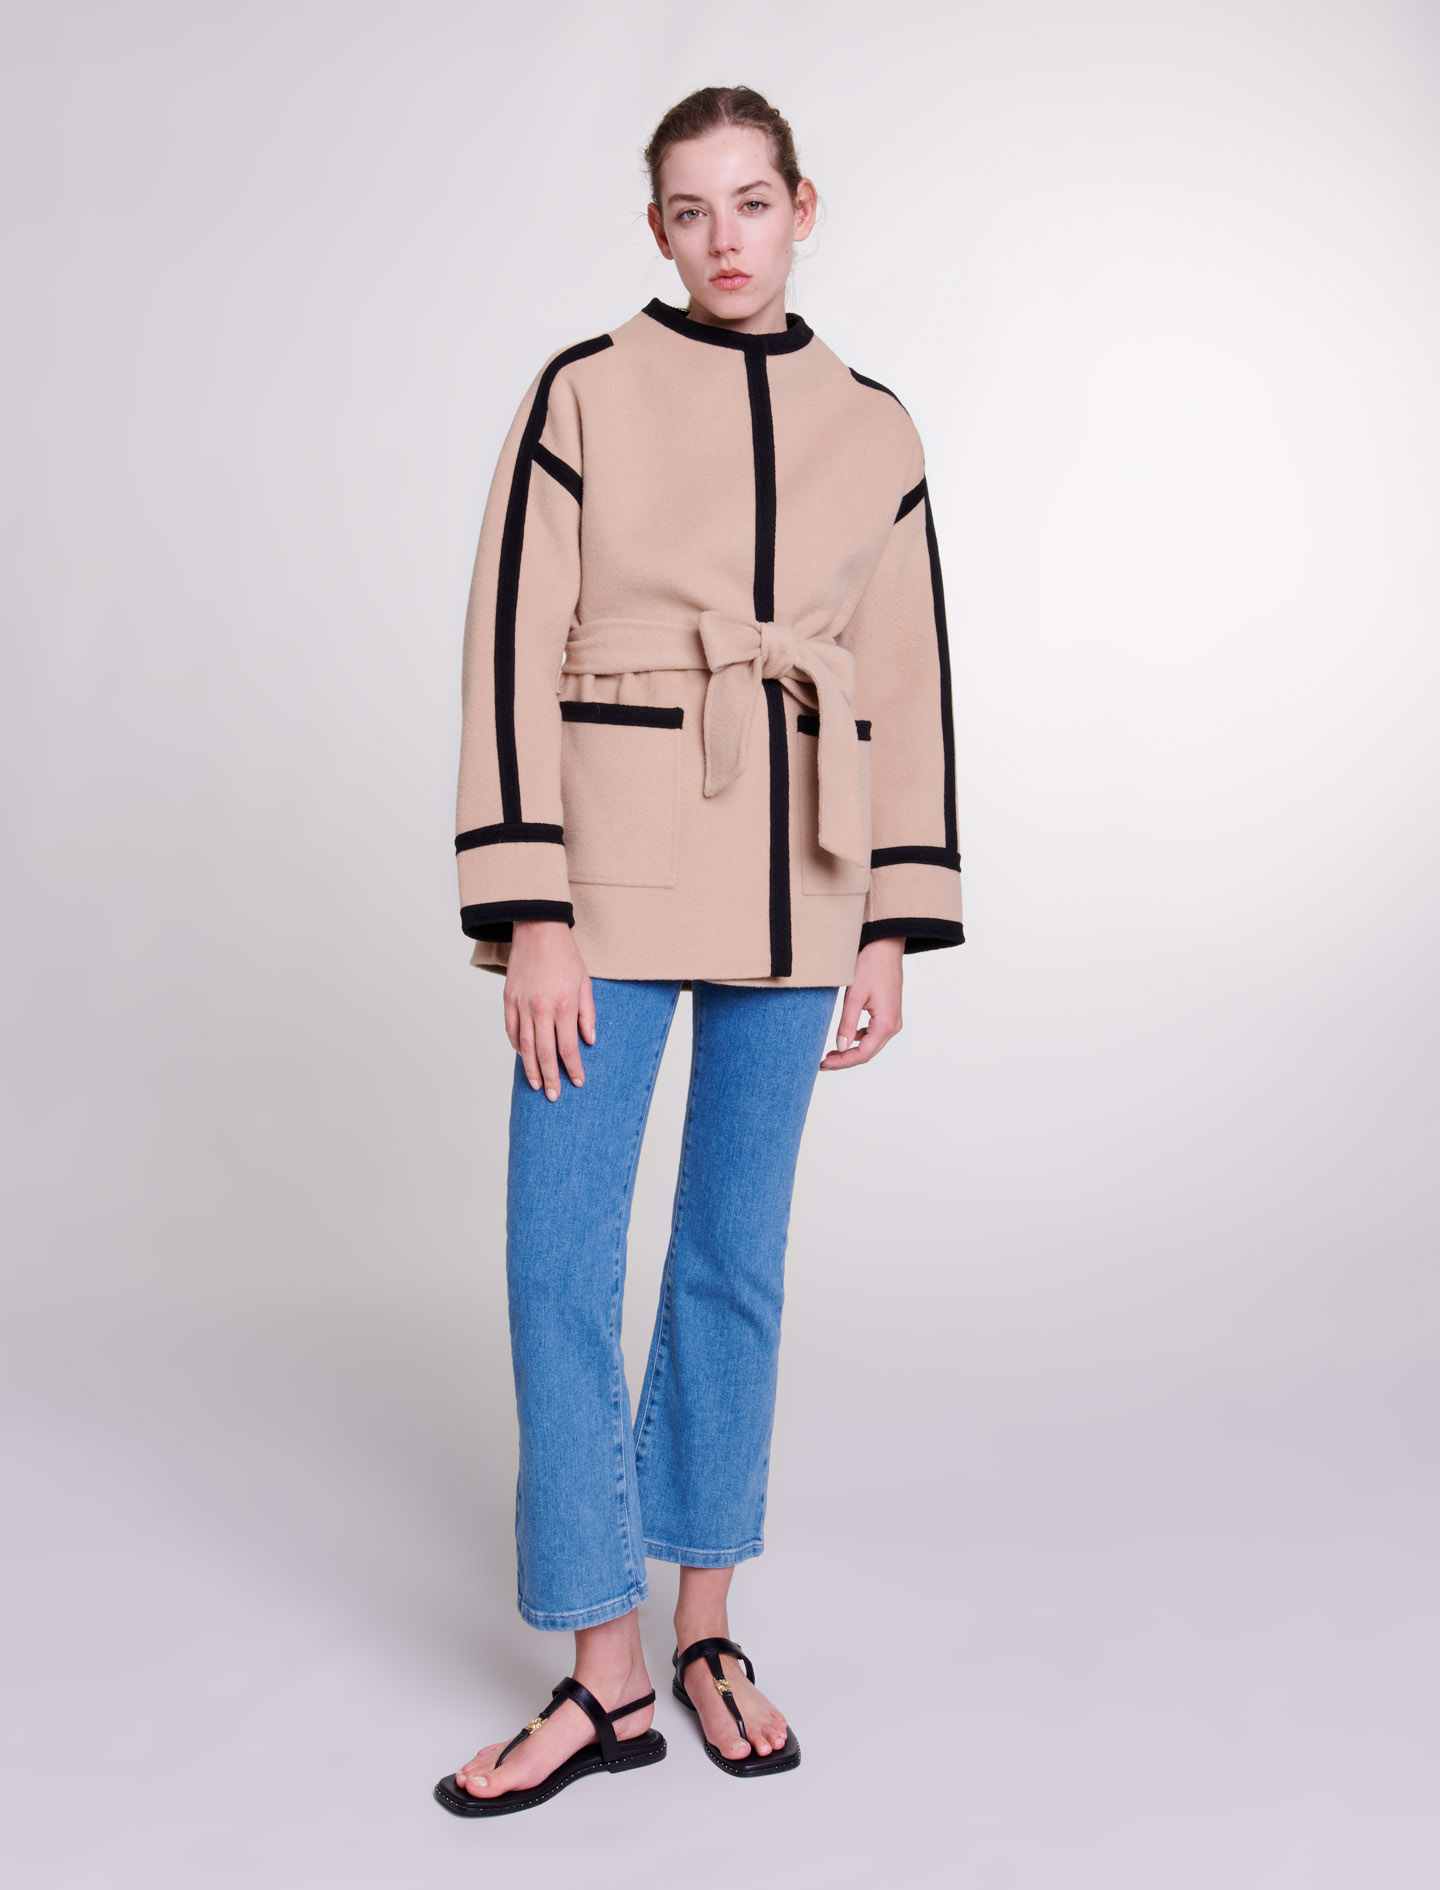 Mixte's wool, Short two-tone coat for Spring/Summer, size Mixte-Coats-US L / FR 40, in color Camel / Brown